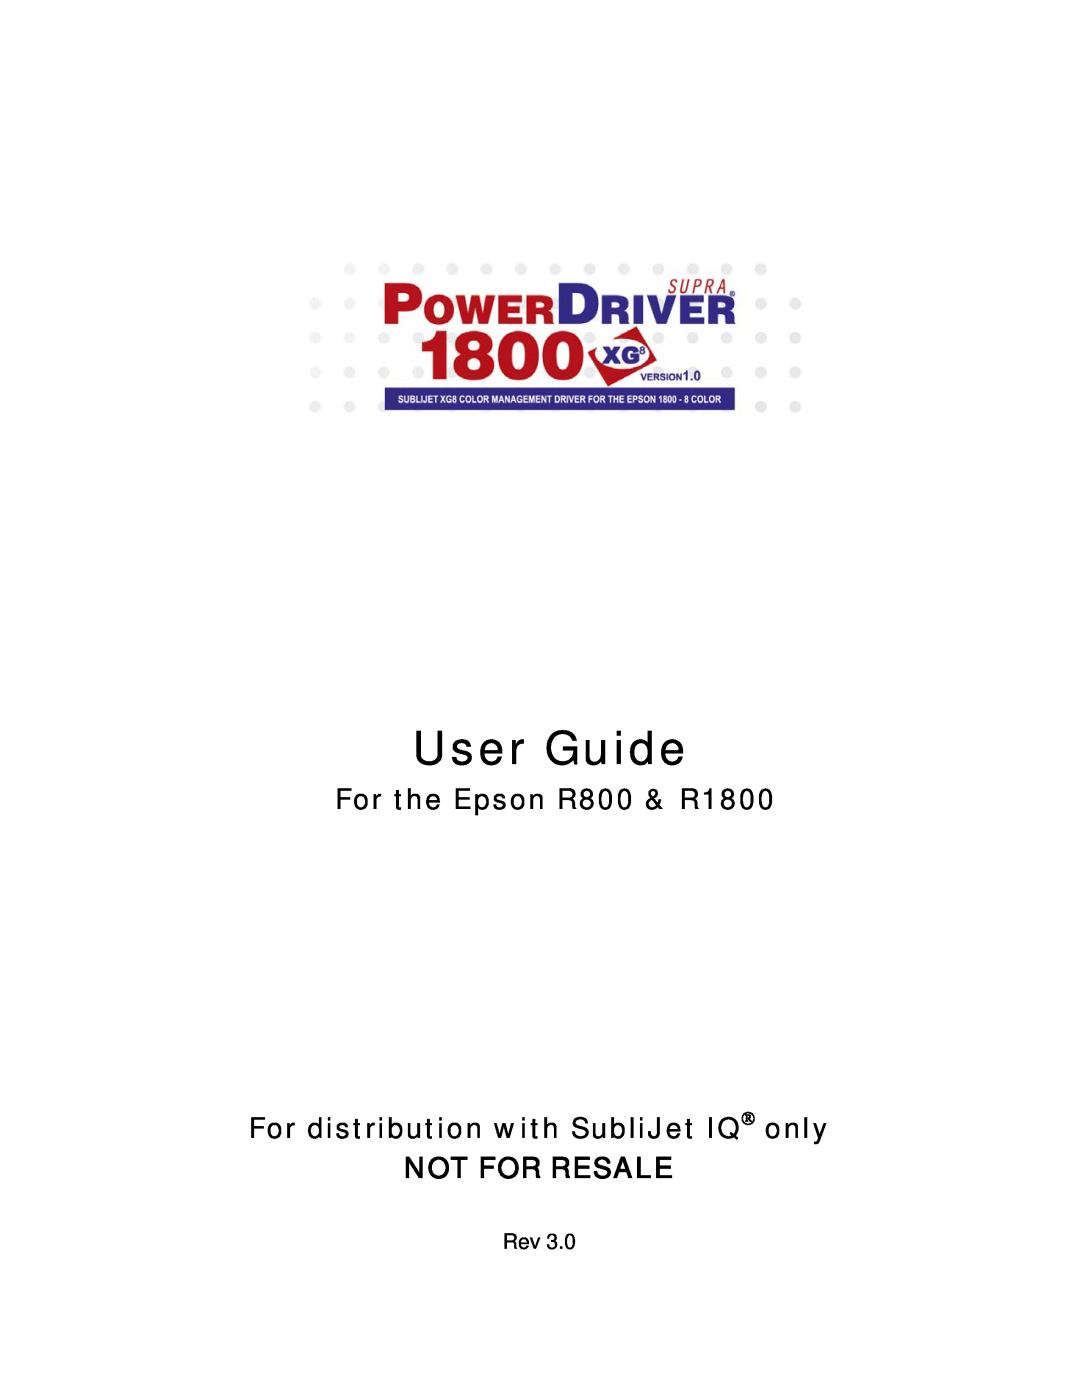 Epson manual For the Epson R800 & R1800 For distribution with SubliJet IQ only, Not For Resale, User Guide 